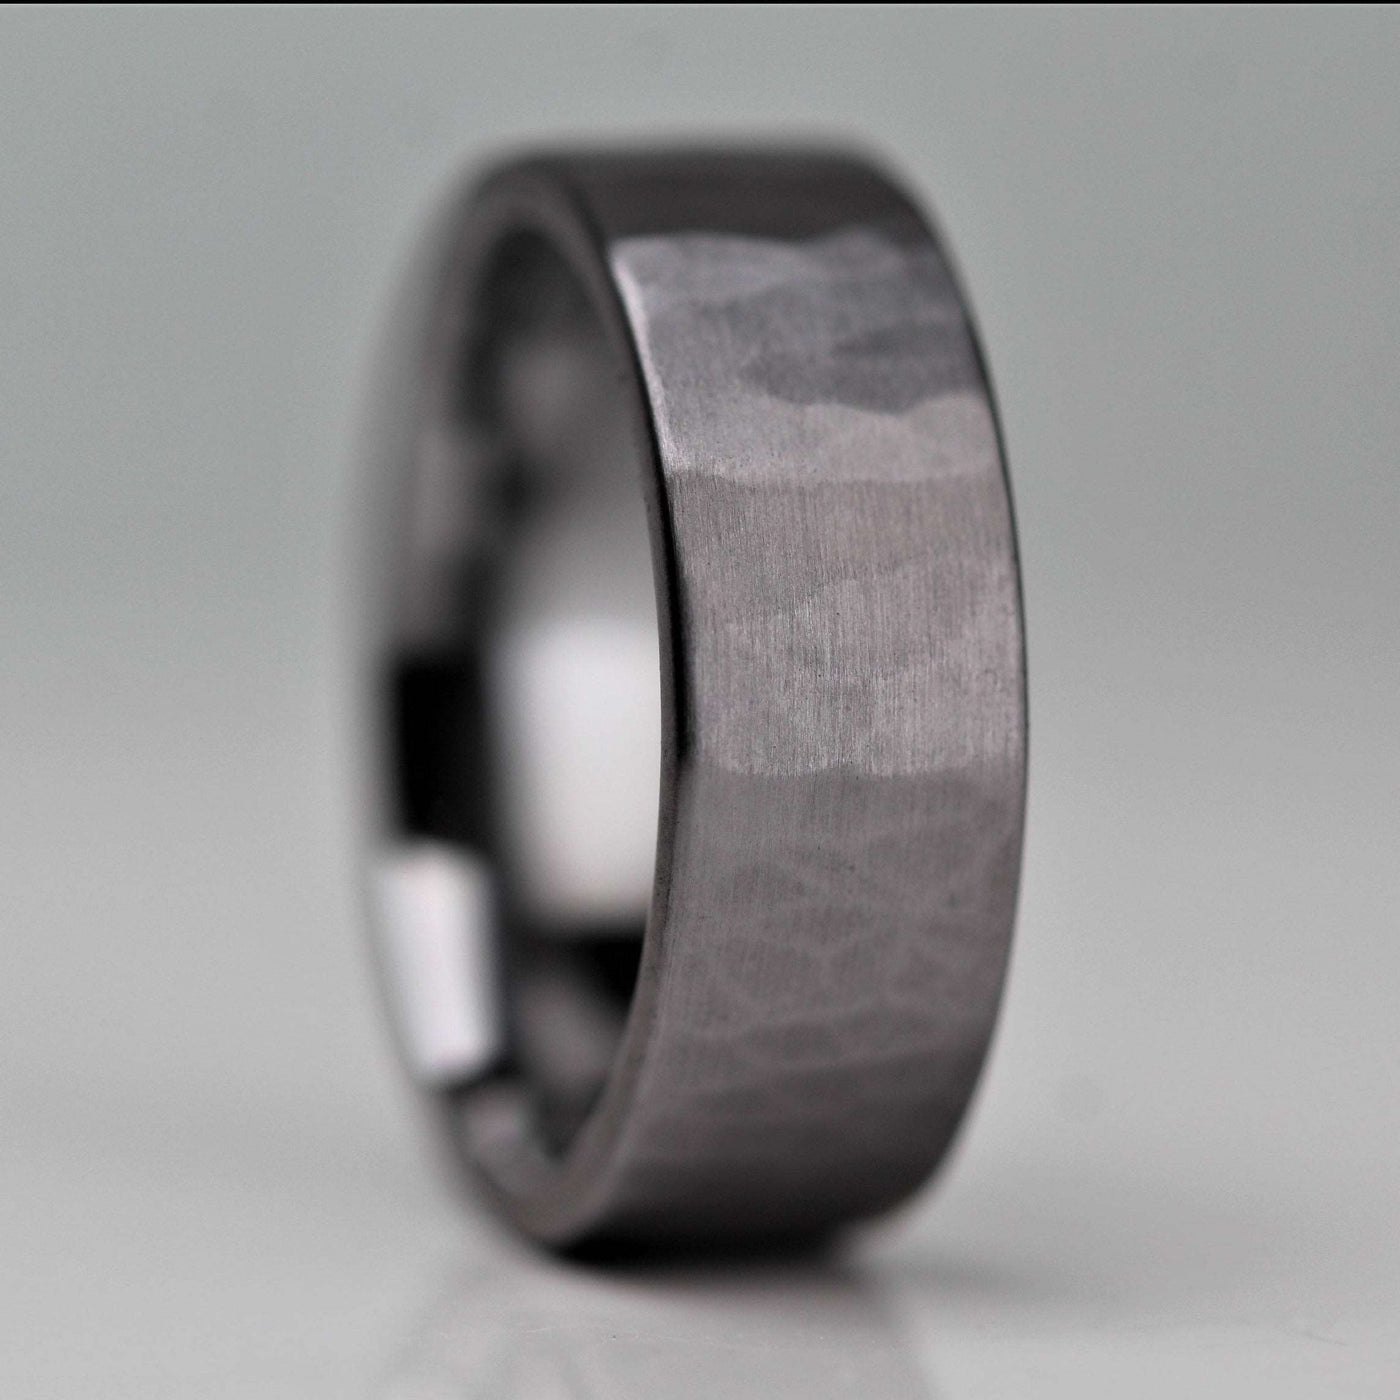 7mm wide flat Tantalum wedding ring with a hammered, brushed finish. alternative metal wedding ring